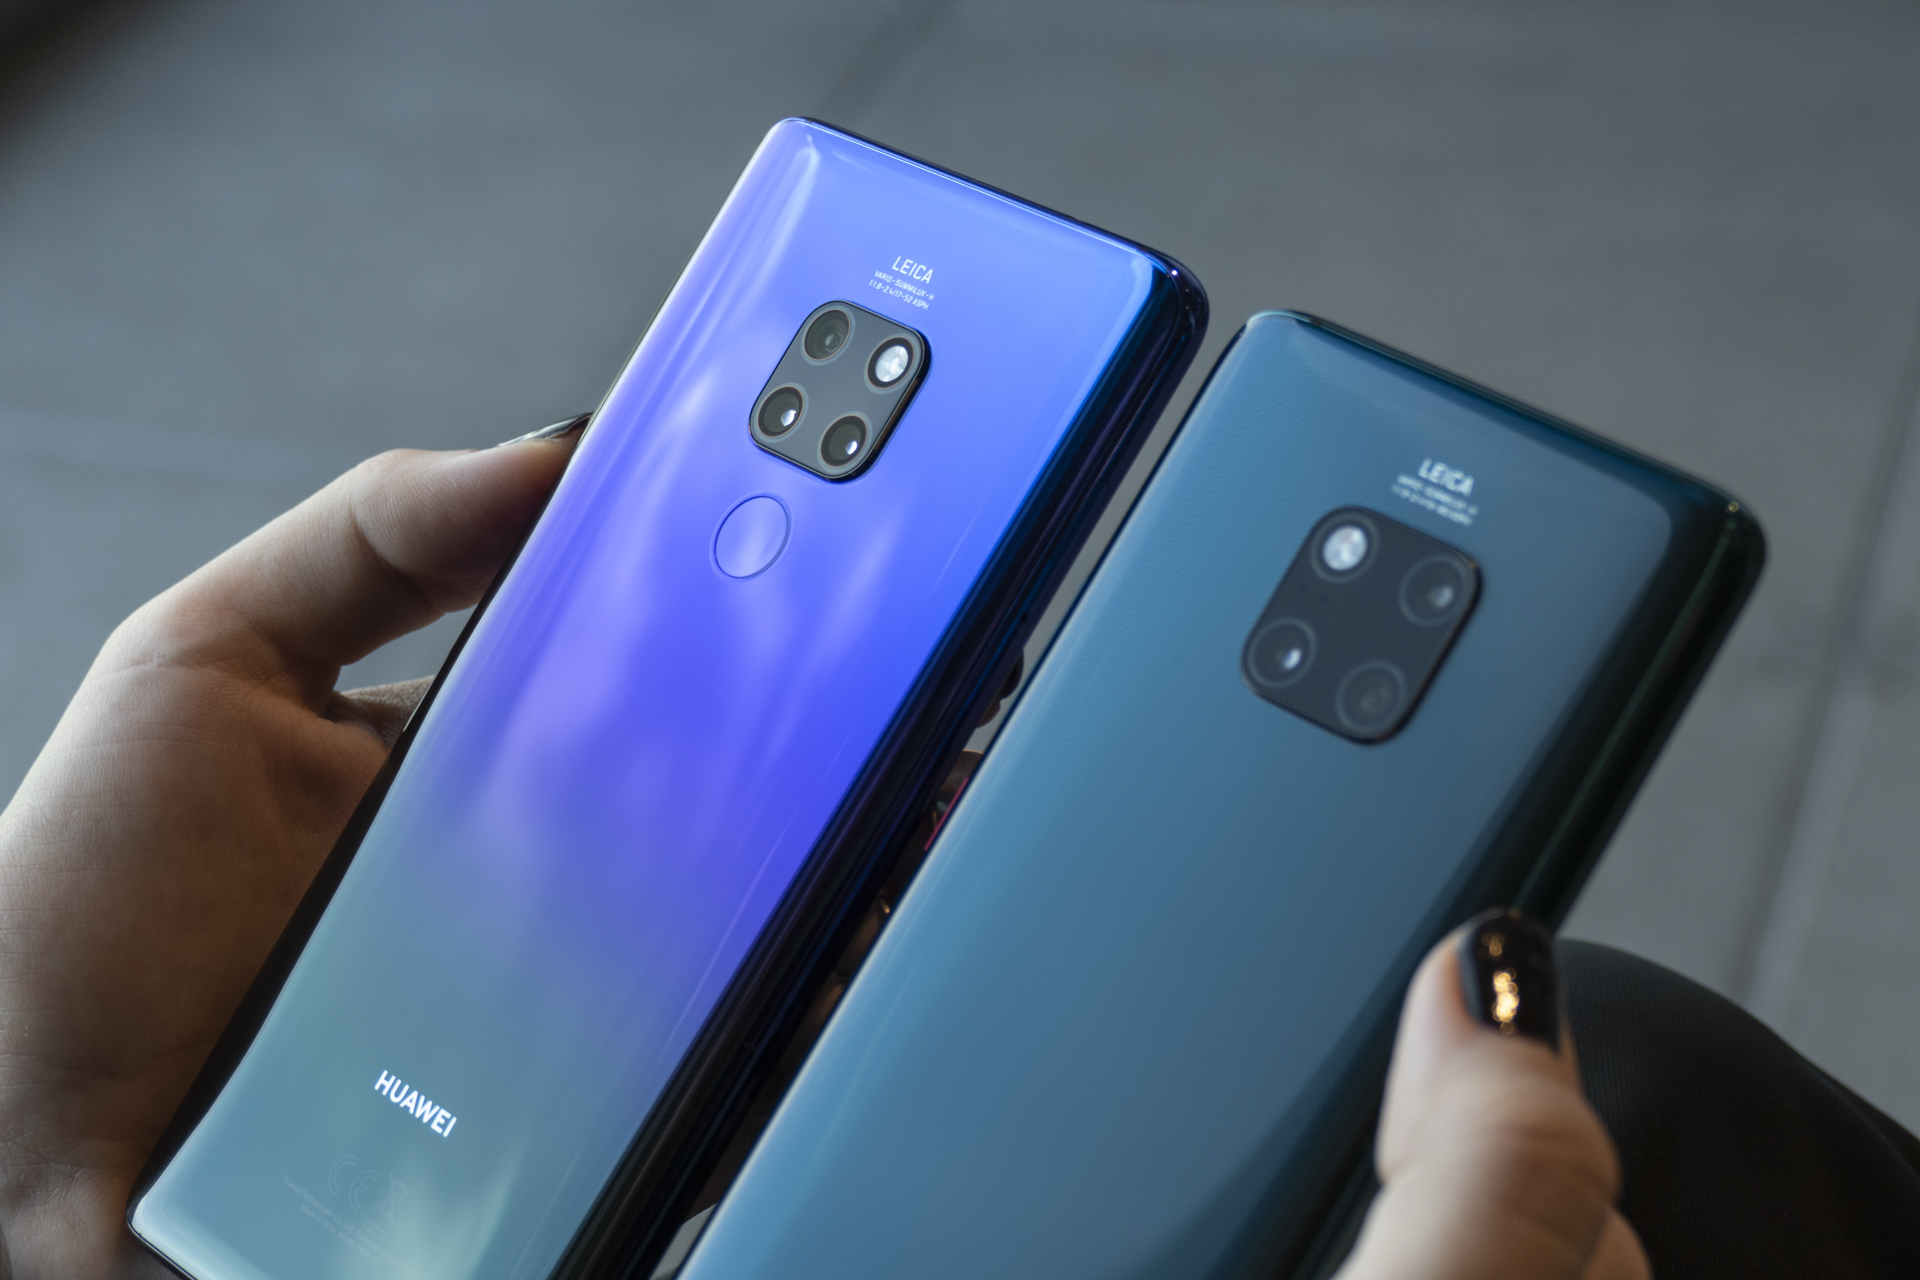 Verraad stereo Senaat Huawei Mate 20, Mate 20 Pro, and Mate 20 X: Everything You Need to Know |  Digital Trends